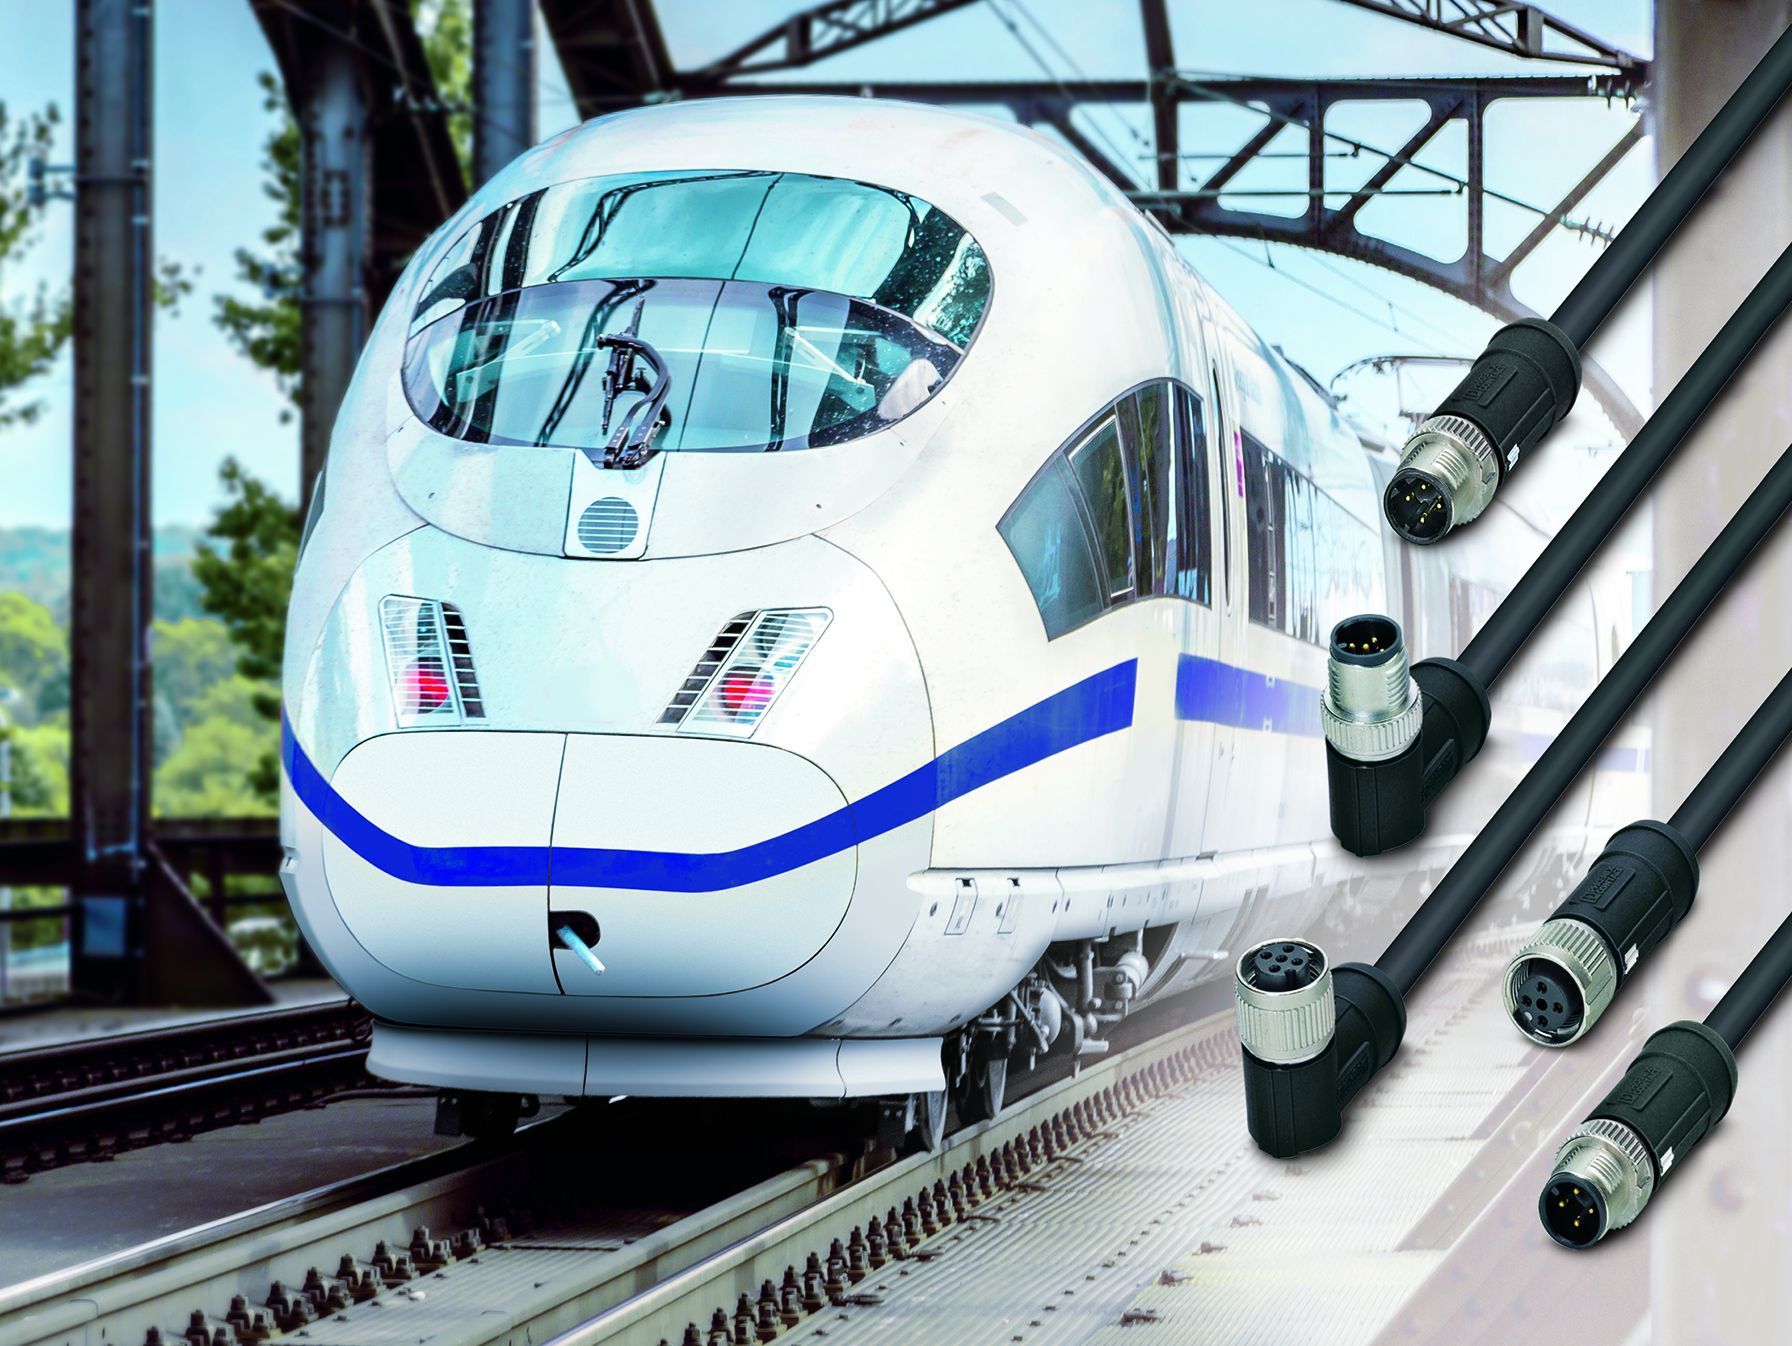 Phoenix Contact offers M12 cables designed especially for the rail industry